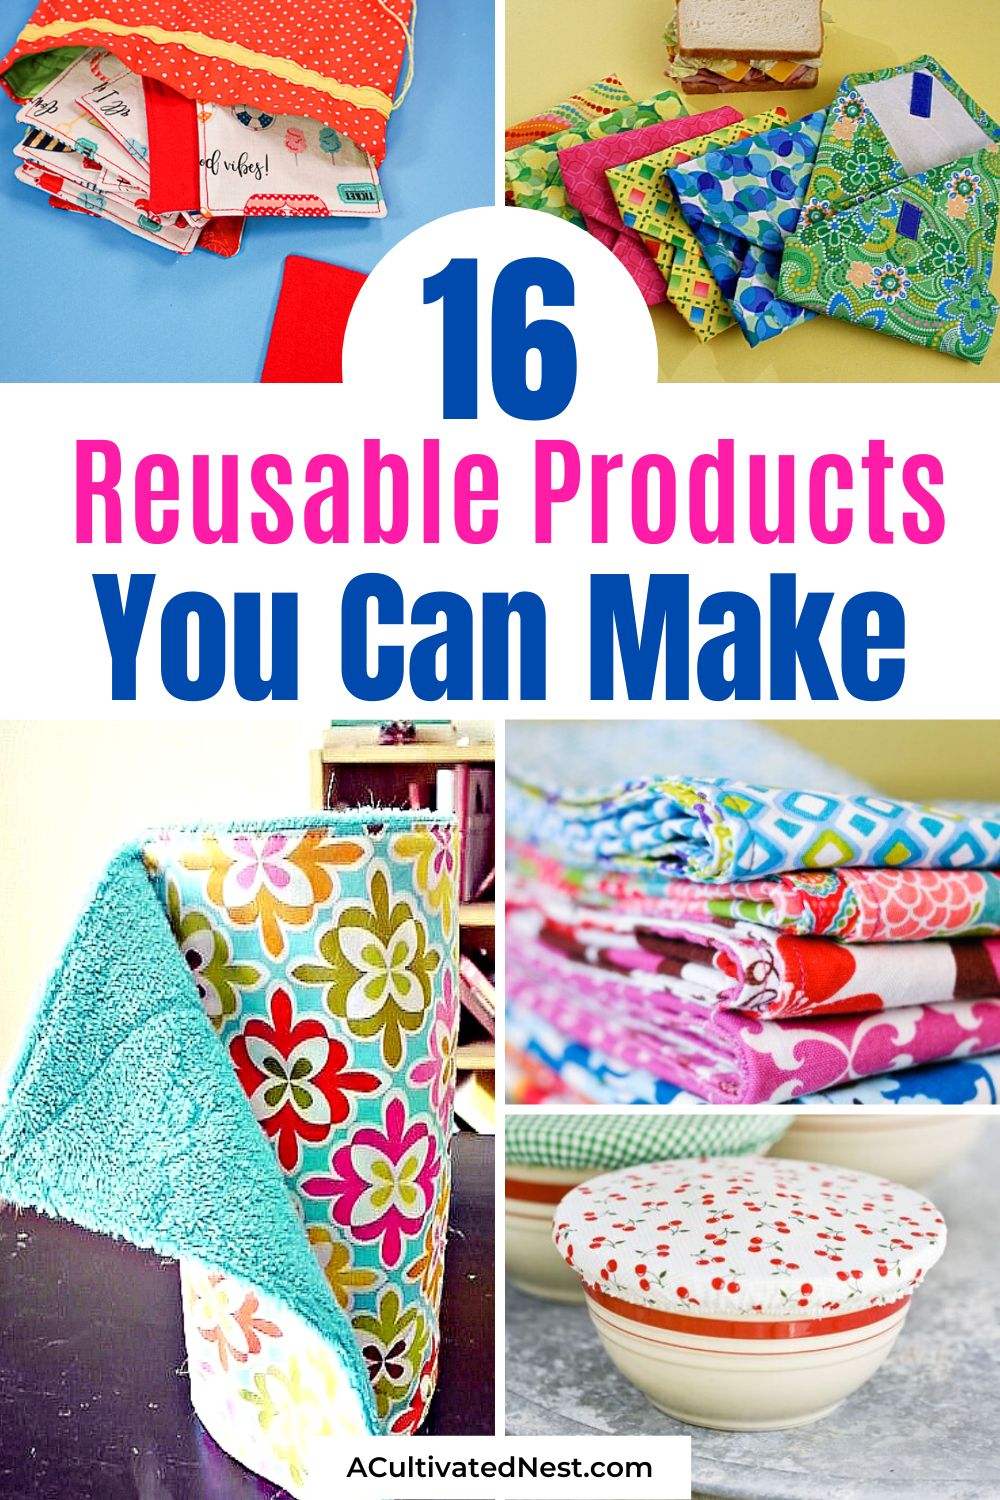 16 Disposable Products You Can Replace with Reusable Ones- Want to save a lot of money, and do something good for the environment at the same time? Then you should do these DIYs to replace disposable products in your home with reusable ones! | frugal living money saving tips, #saveMoney #livingFrugally #ecoFriendly #DIY #ACultivatedNest